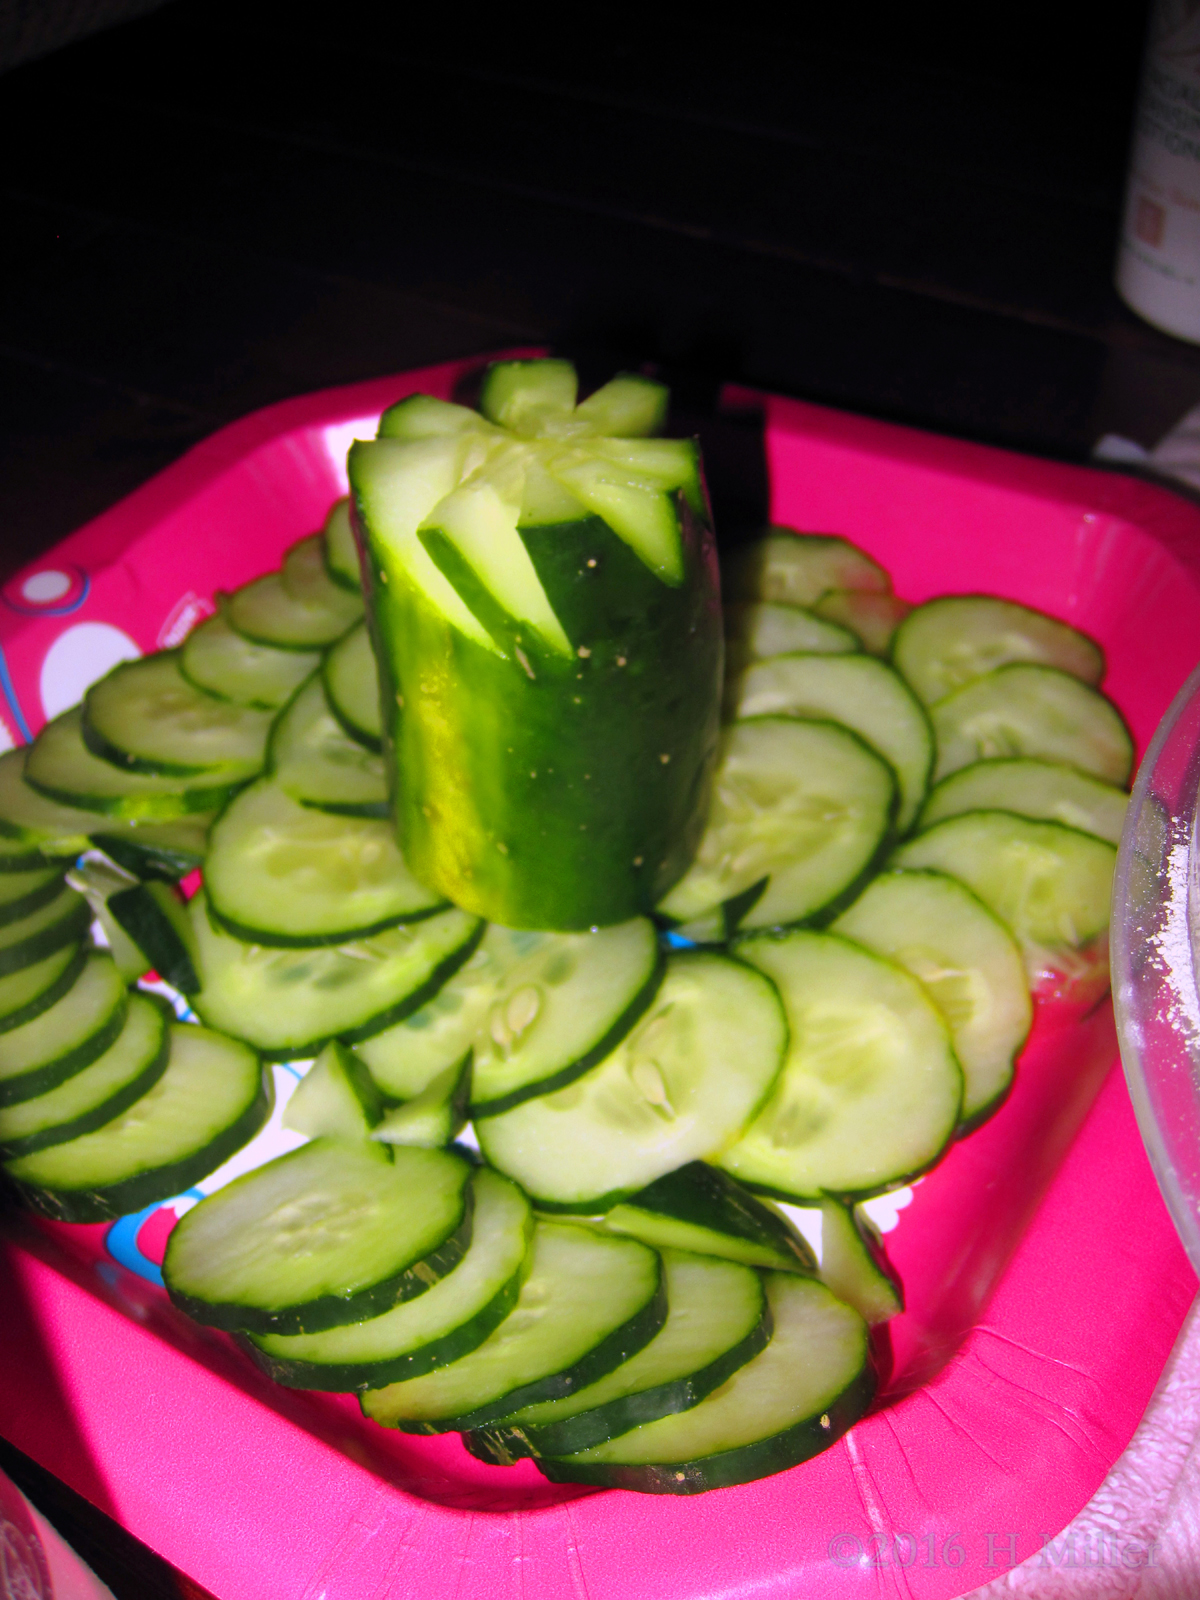 Cucumber Cuttings For Kids Facials On A Pink Plate